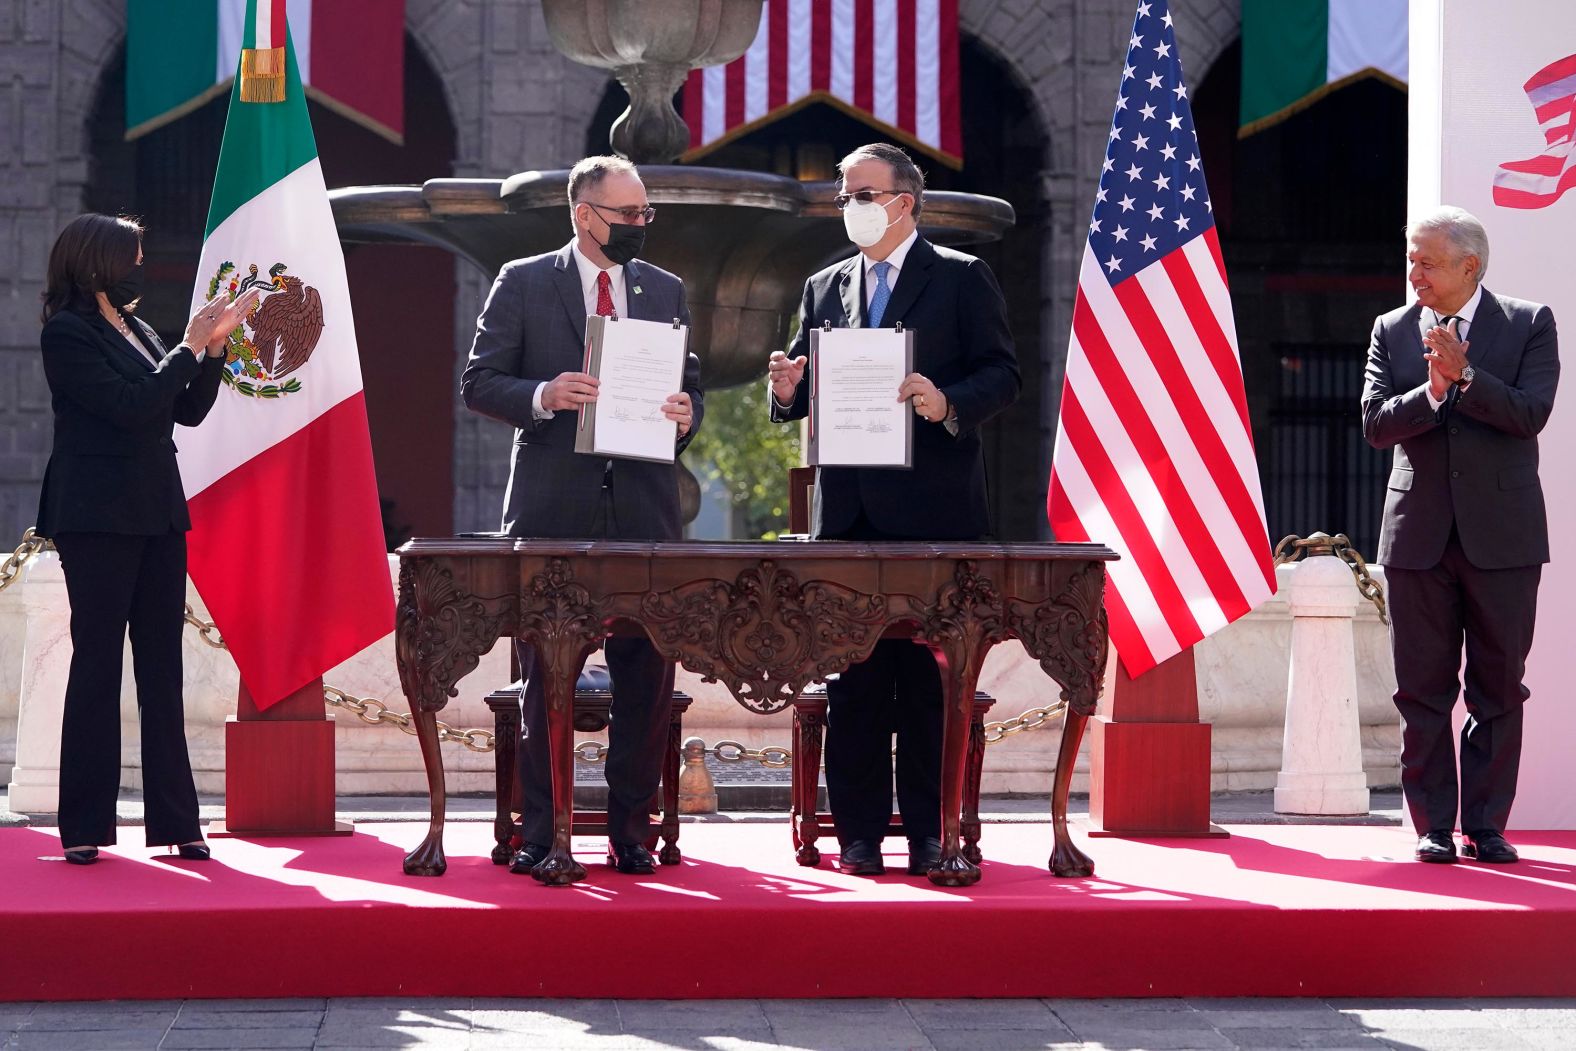 Harris attends a signing ceremony with the President of Mexico on Tuesday at the National Palace in Mexico City. Mexico's Foreign Minister Marcelo Ebrard Casaubon, and John Creamer, Chargé d'Affaires US Embassy signed a Memorandum of Understanding between the United States and Mexico to establish a strategic partnership to cooperate on development programs in the Northern Triangle.